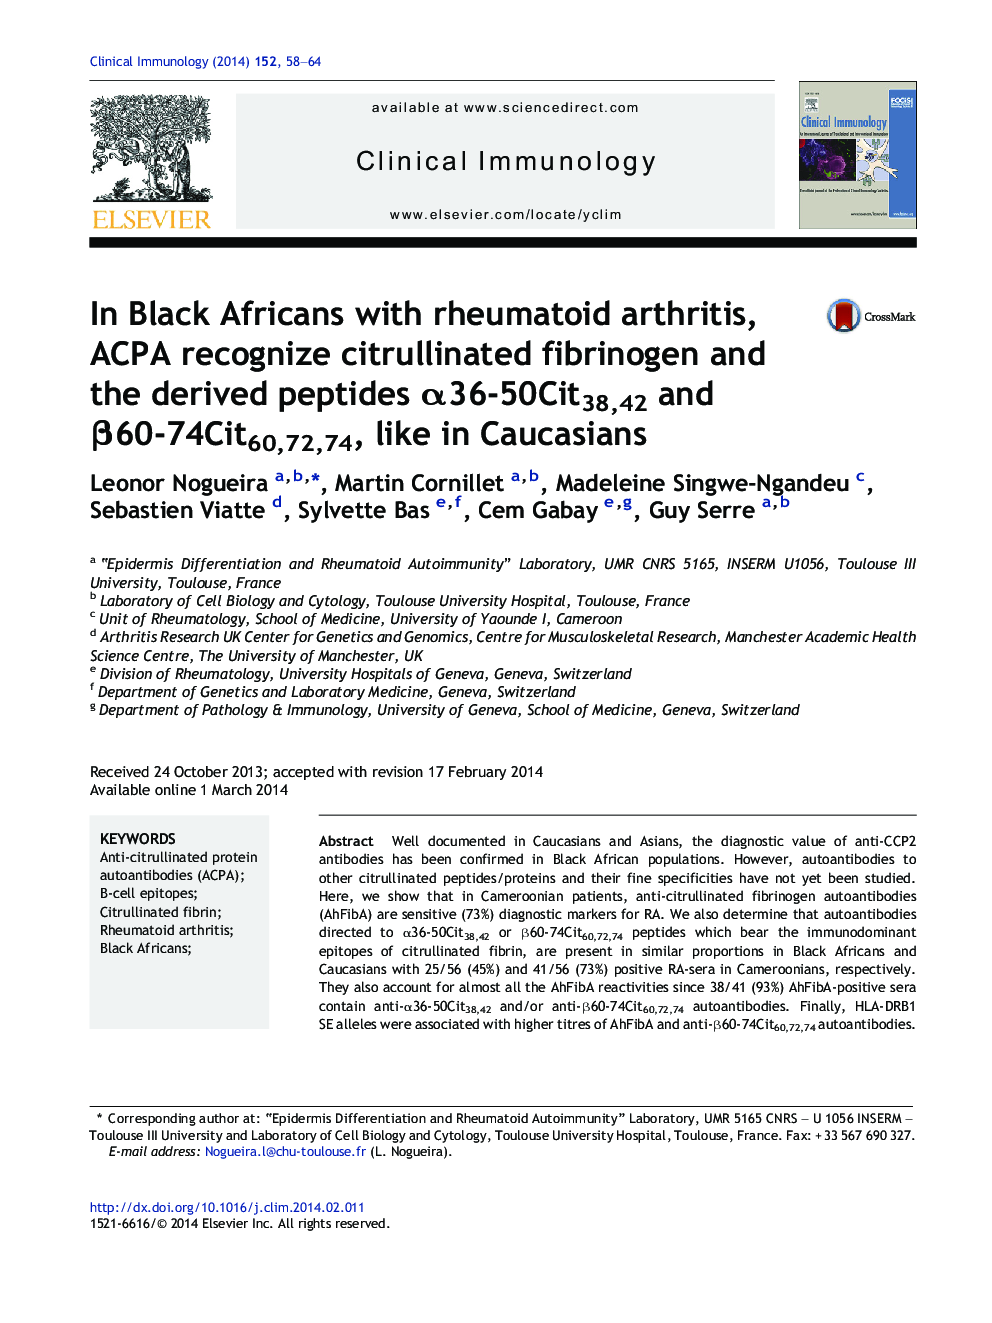 In Black Africans with rheumatoid arthritis, ACPA recognize citrullinated fibrinogen and the derived peptides Î±36-50Cit38,42 and Î²60-74Cit60,72,74, like in Caucasians